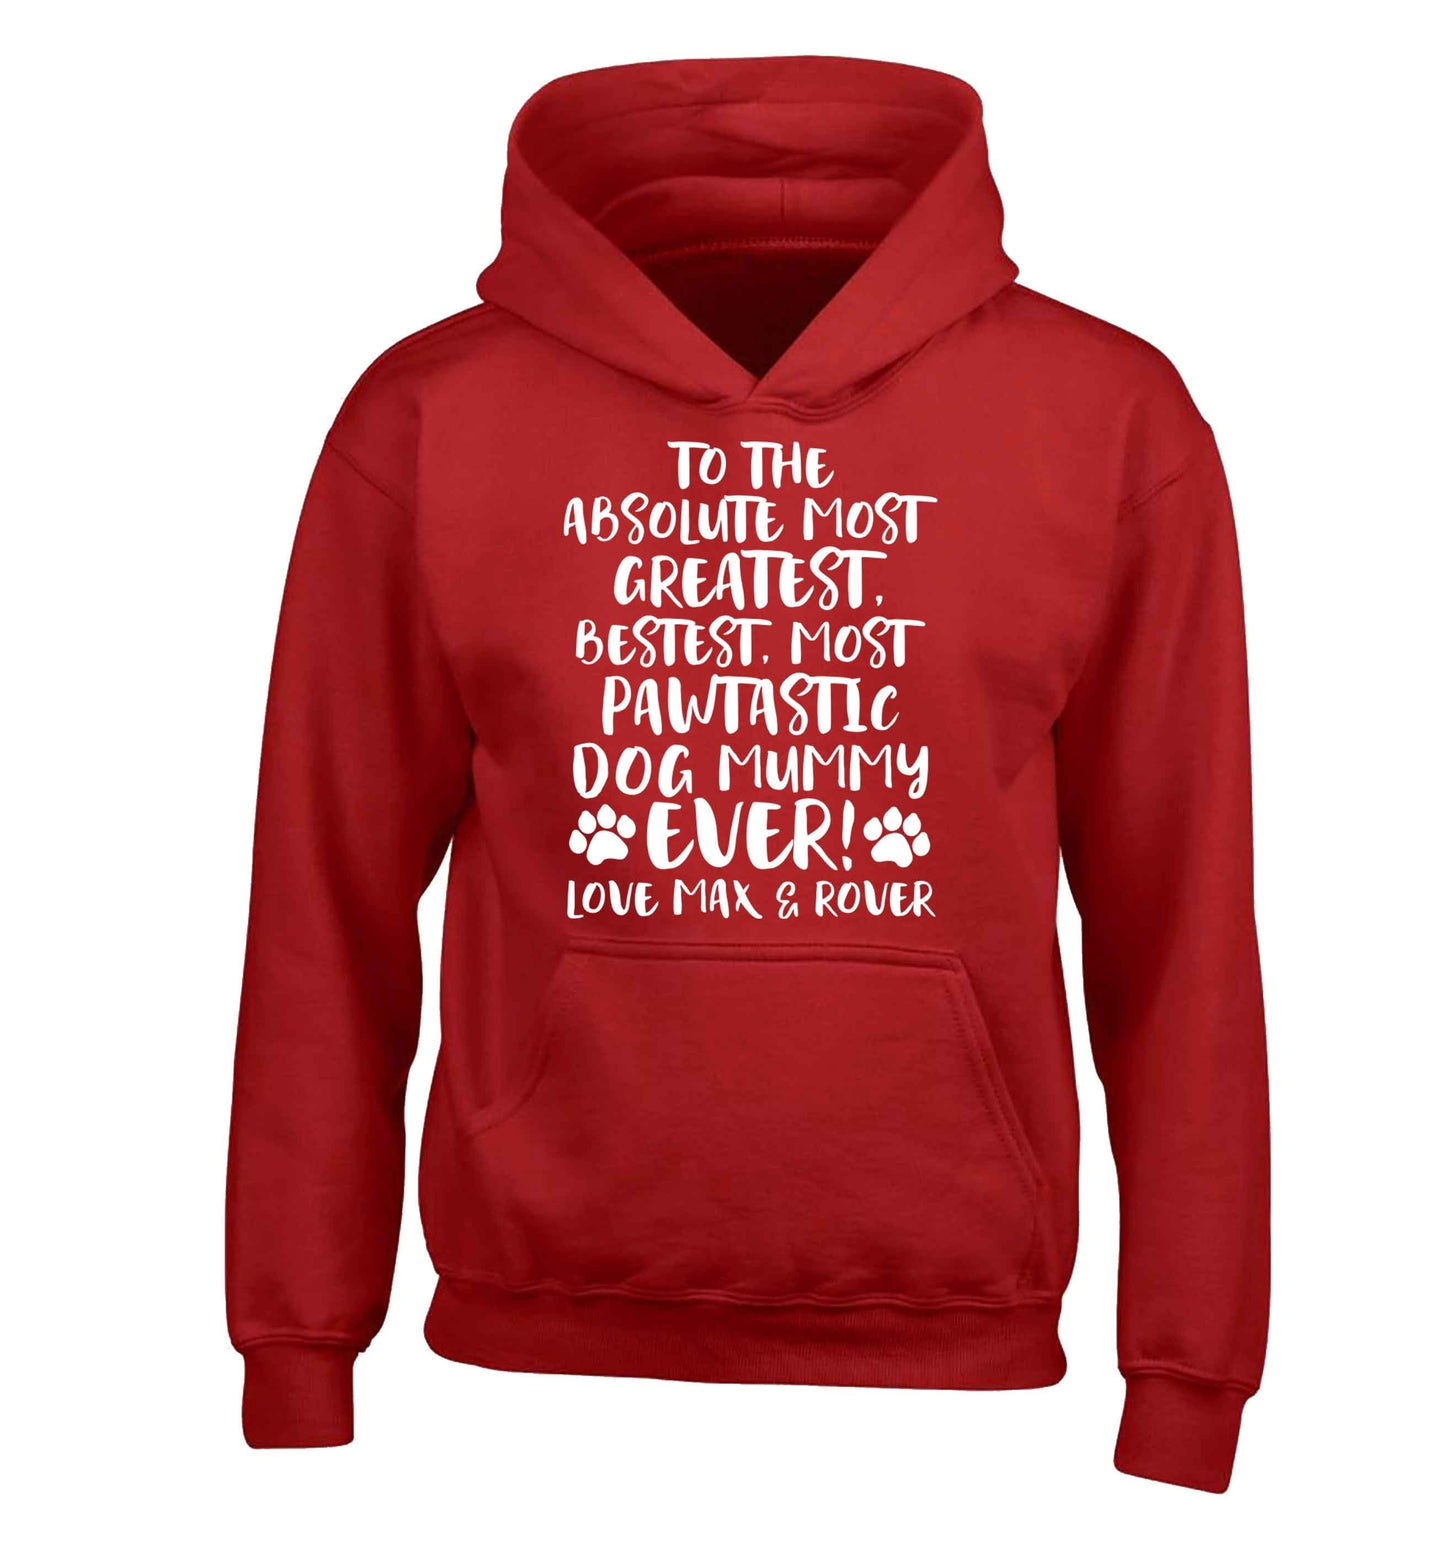 Personalsied to the most pawtastic dog mummy ever children's red hoodie 12-13 Years